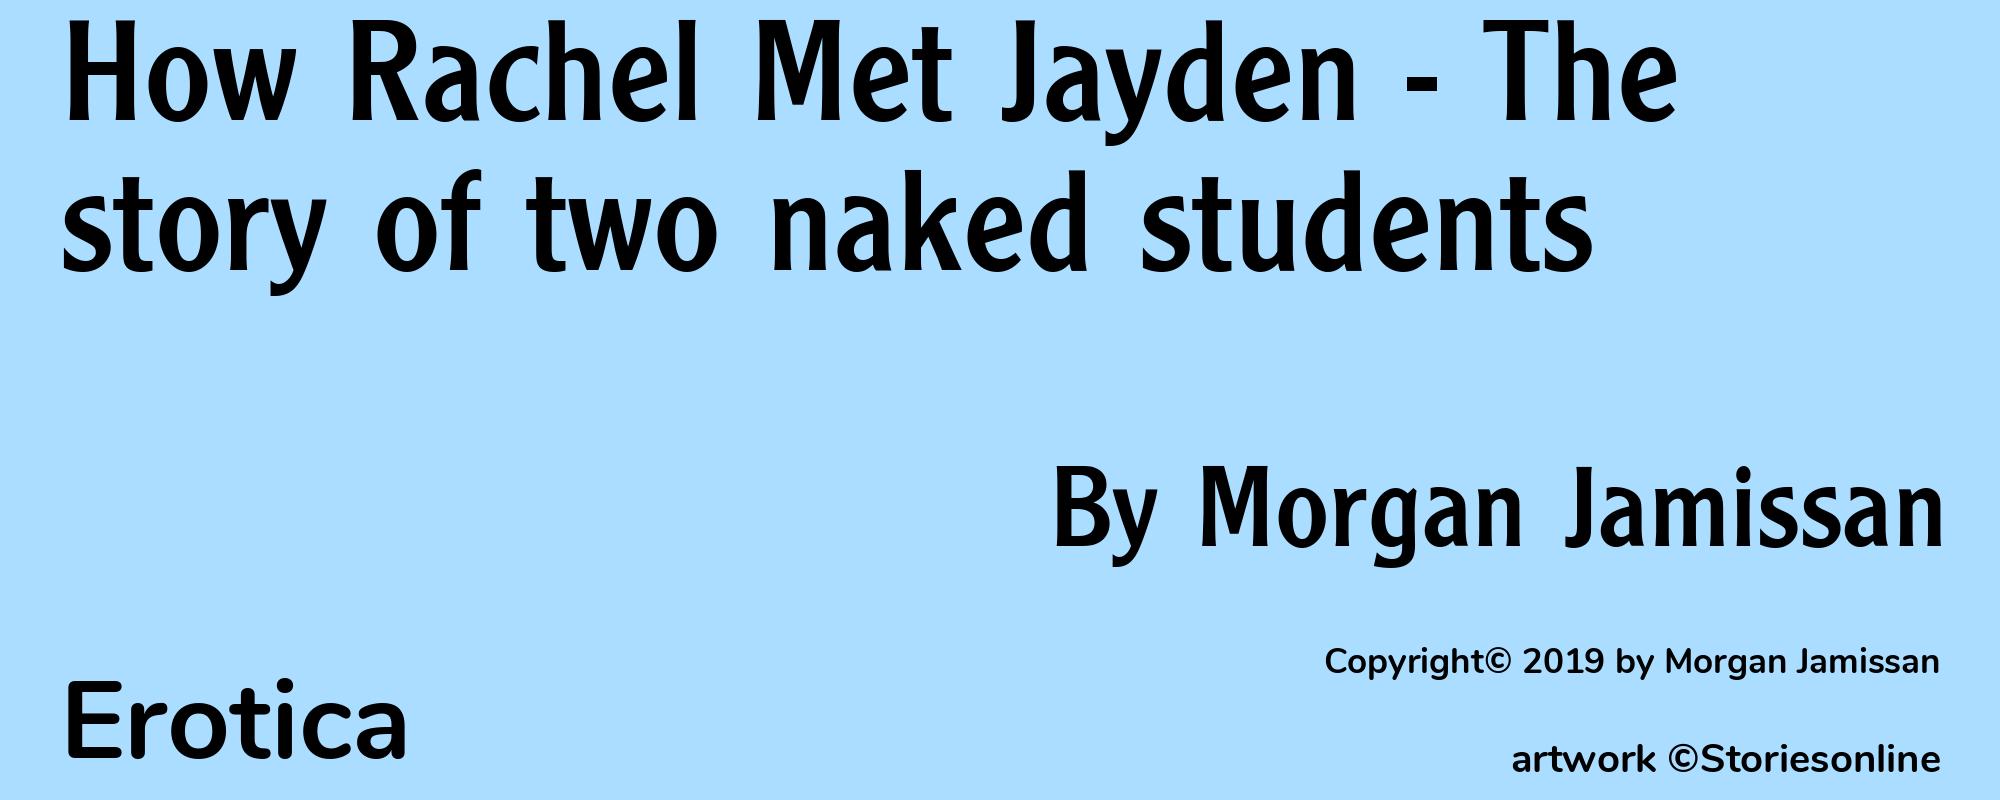 How Rachel Met Jayden - The story of two naked students - Cover